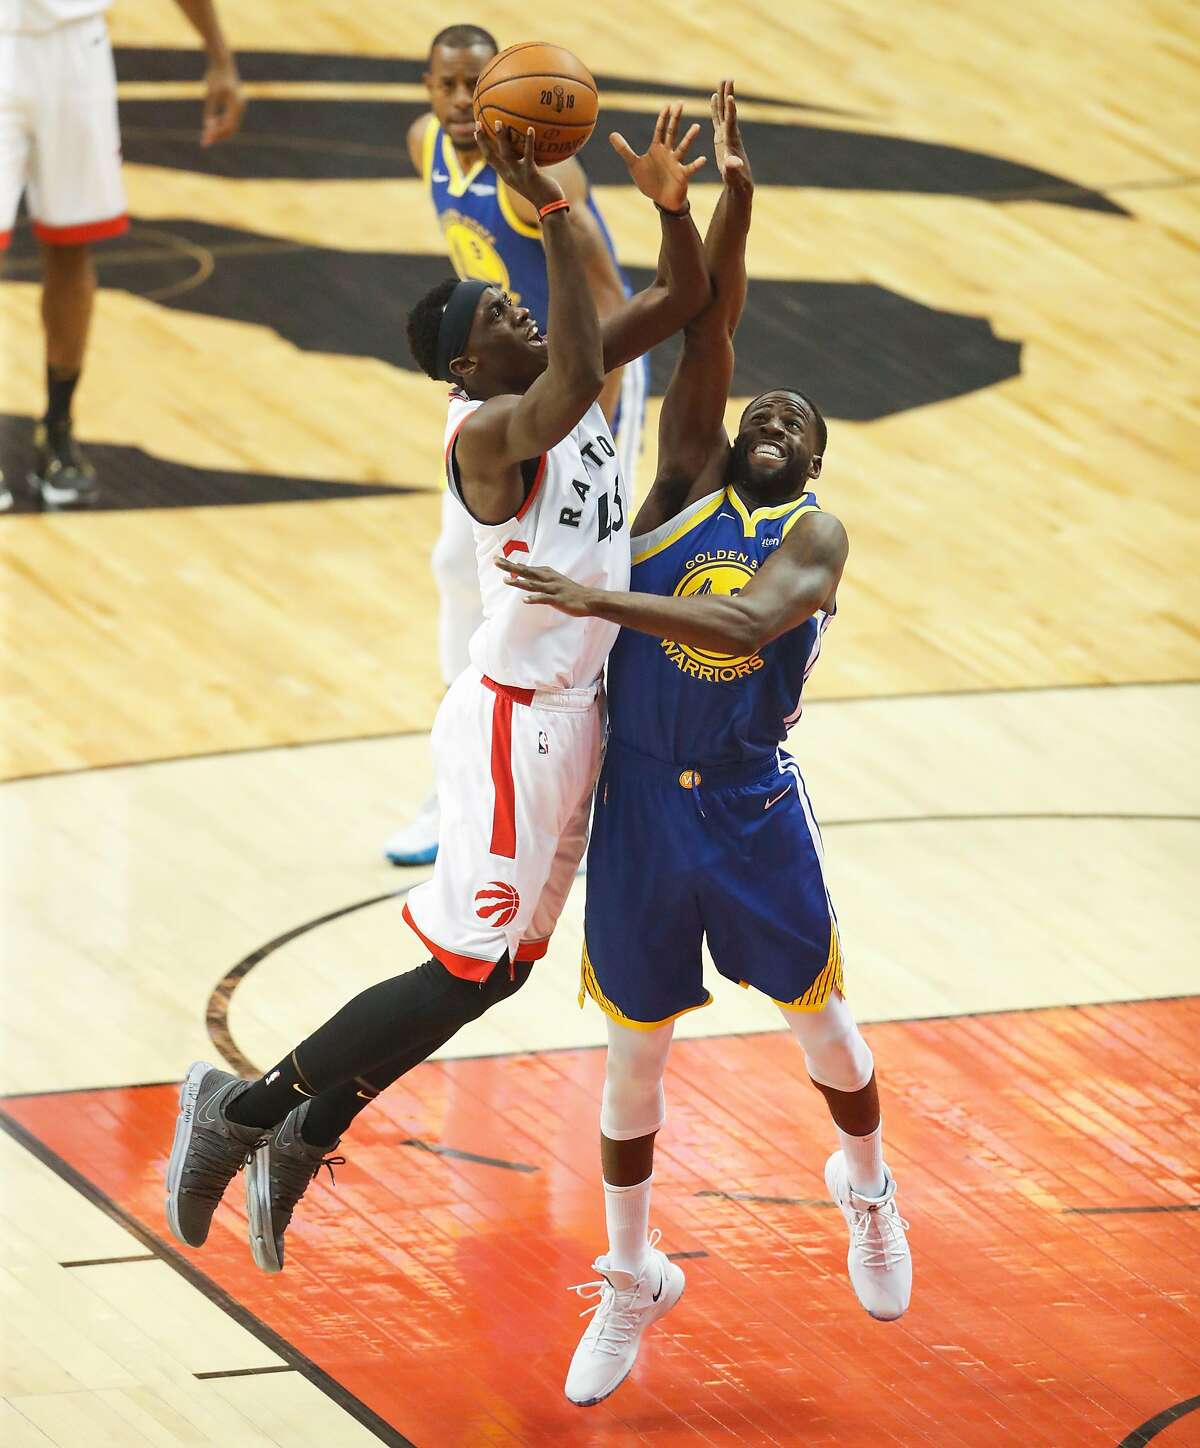 Toronto Raptors’ Pascal Siakam shoots over Golden State Warriors’ Draymond Green in the first quarter during game 1 of the NBA Finals between the Golden State Warriors and the Toronto Raptors at Scotiabank Arena on Thursday, May 30, 2019 in Toronto, Ontario, Canada.